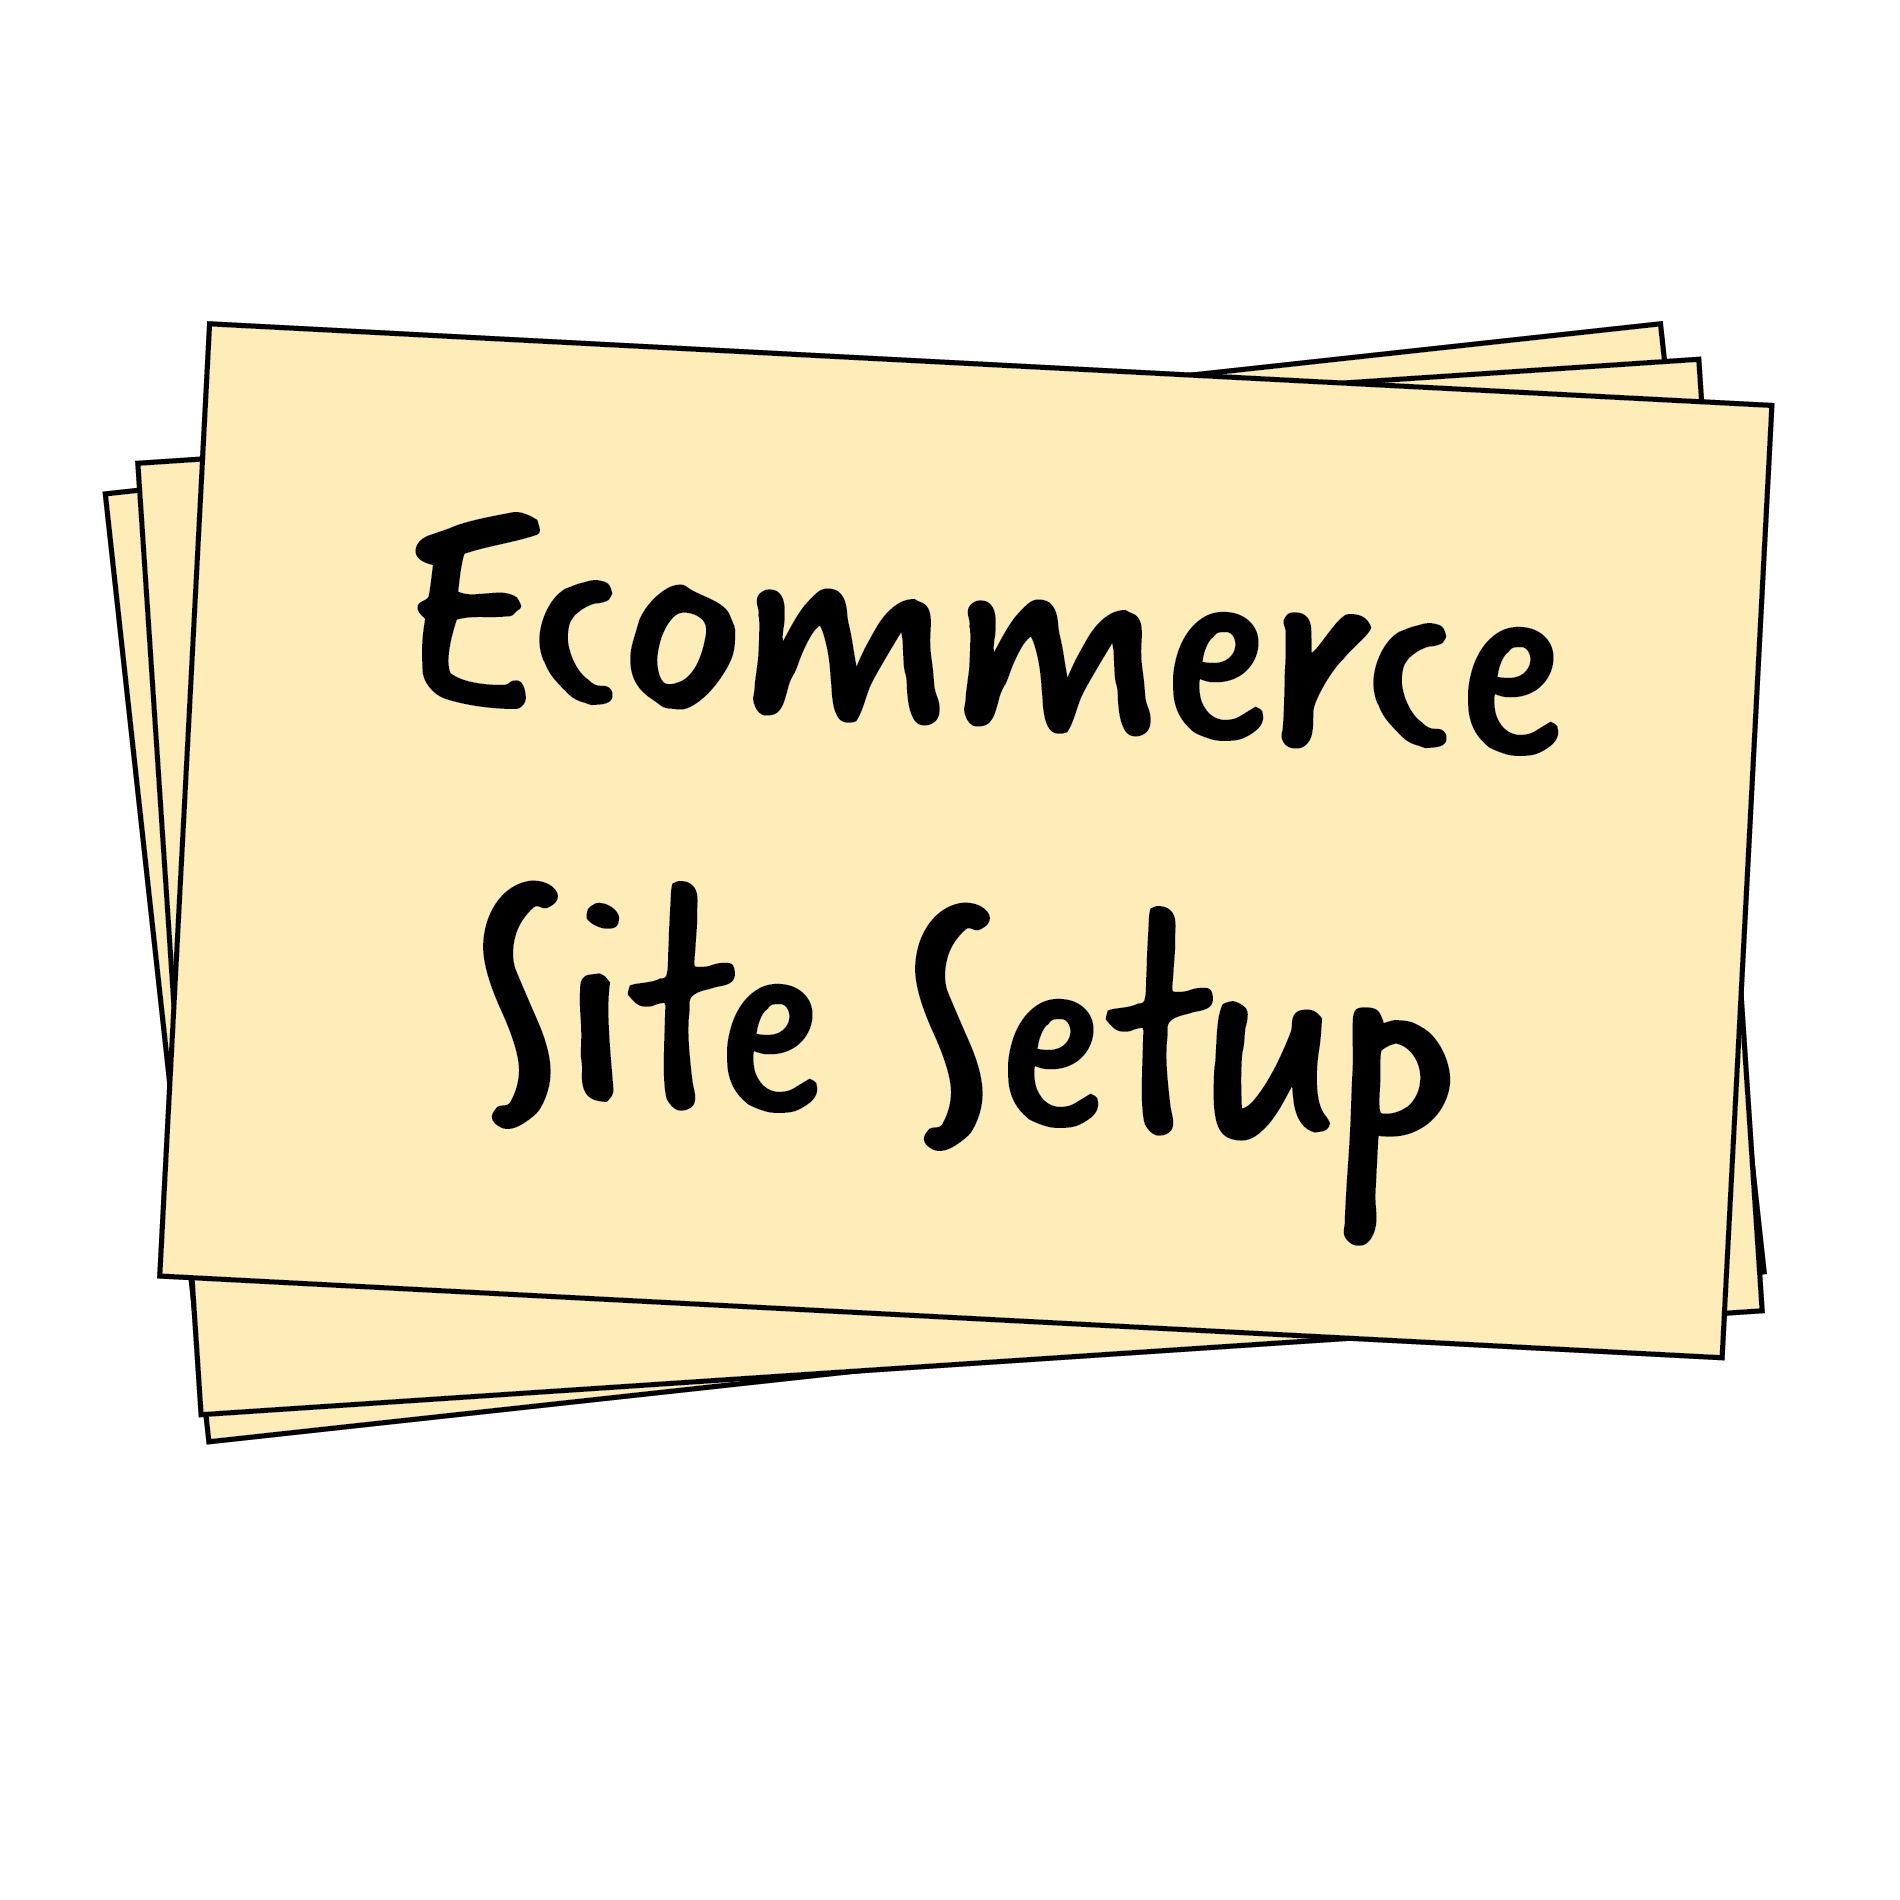 A sign sits at an angle above two other signs, reading Ecommerce Site Setup.